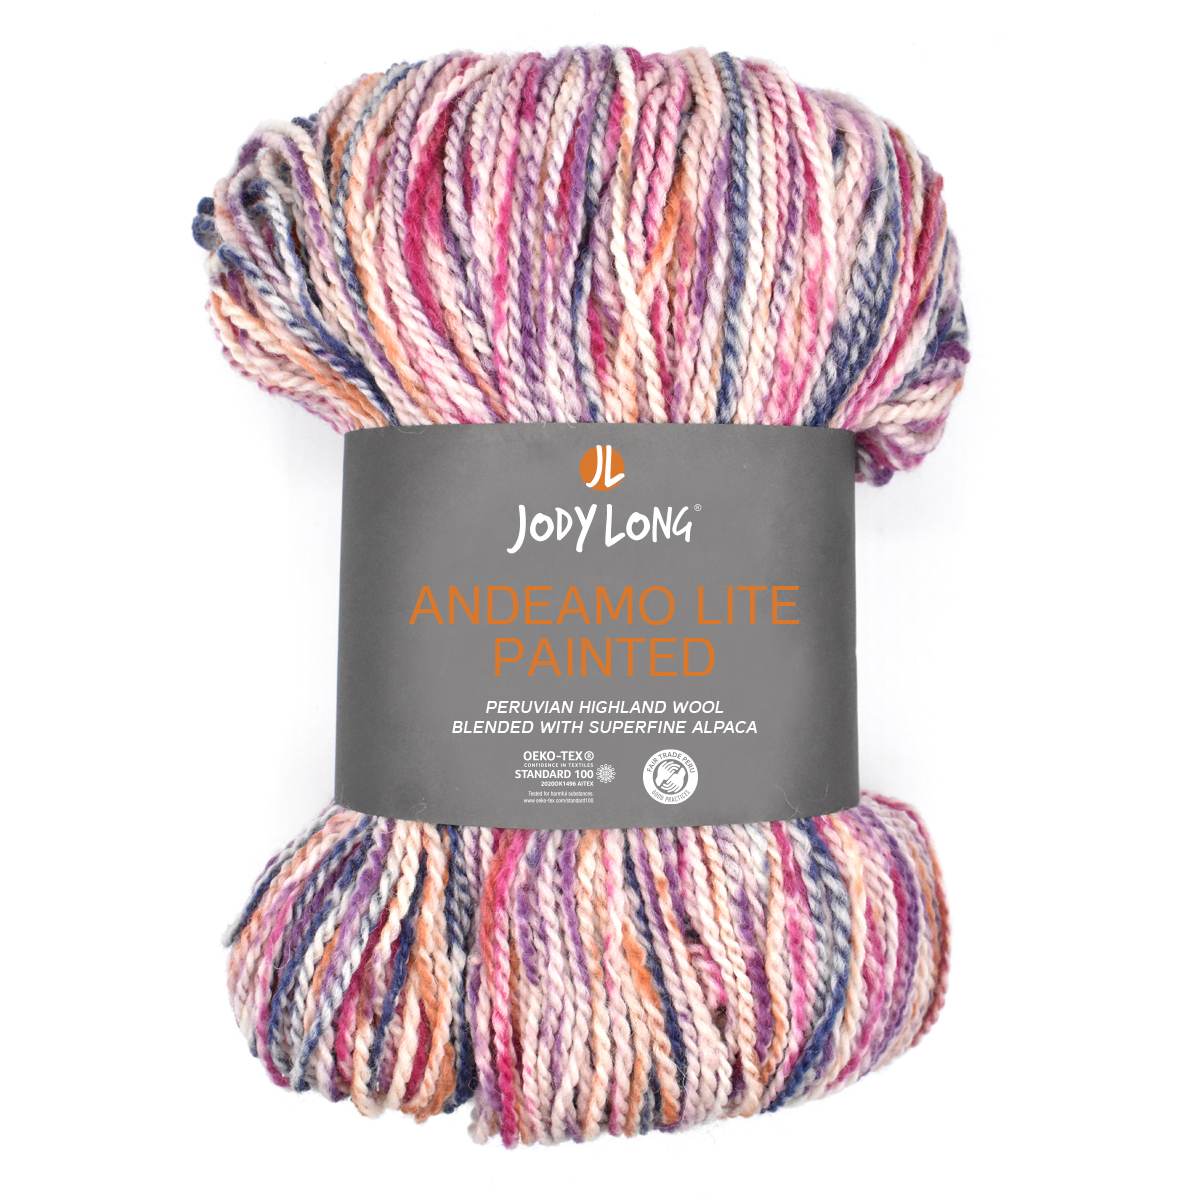 a skein of Andeamo Lite Painted